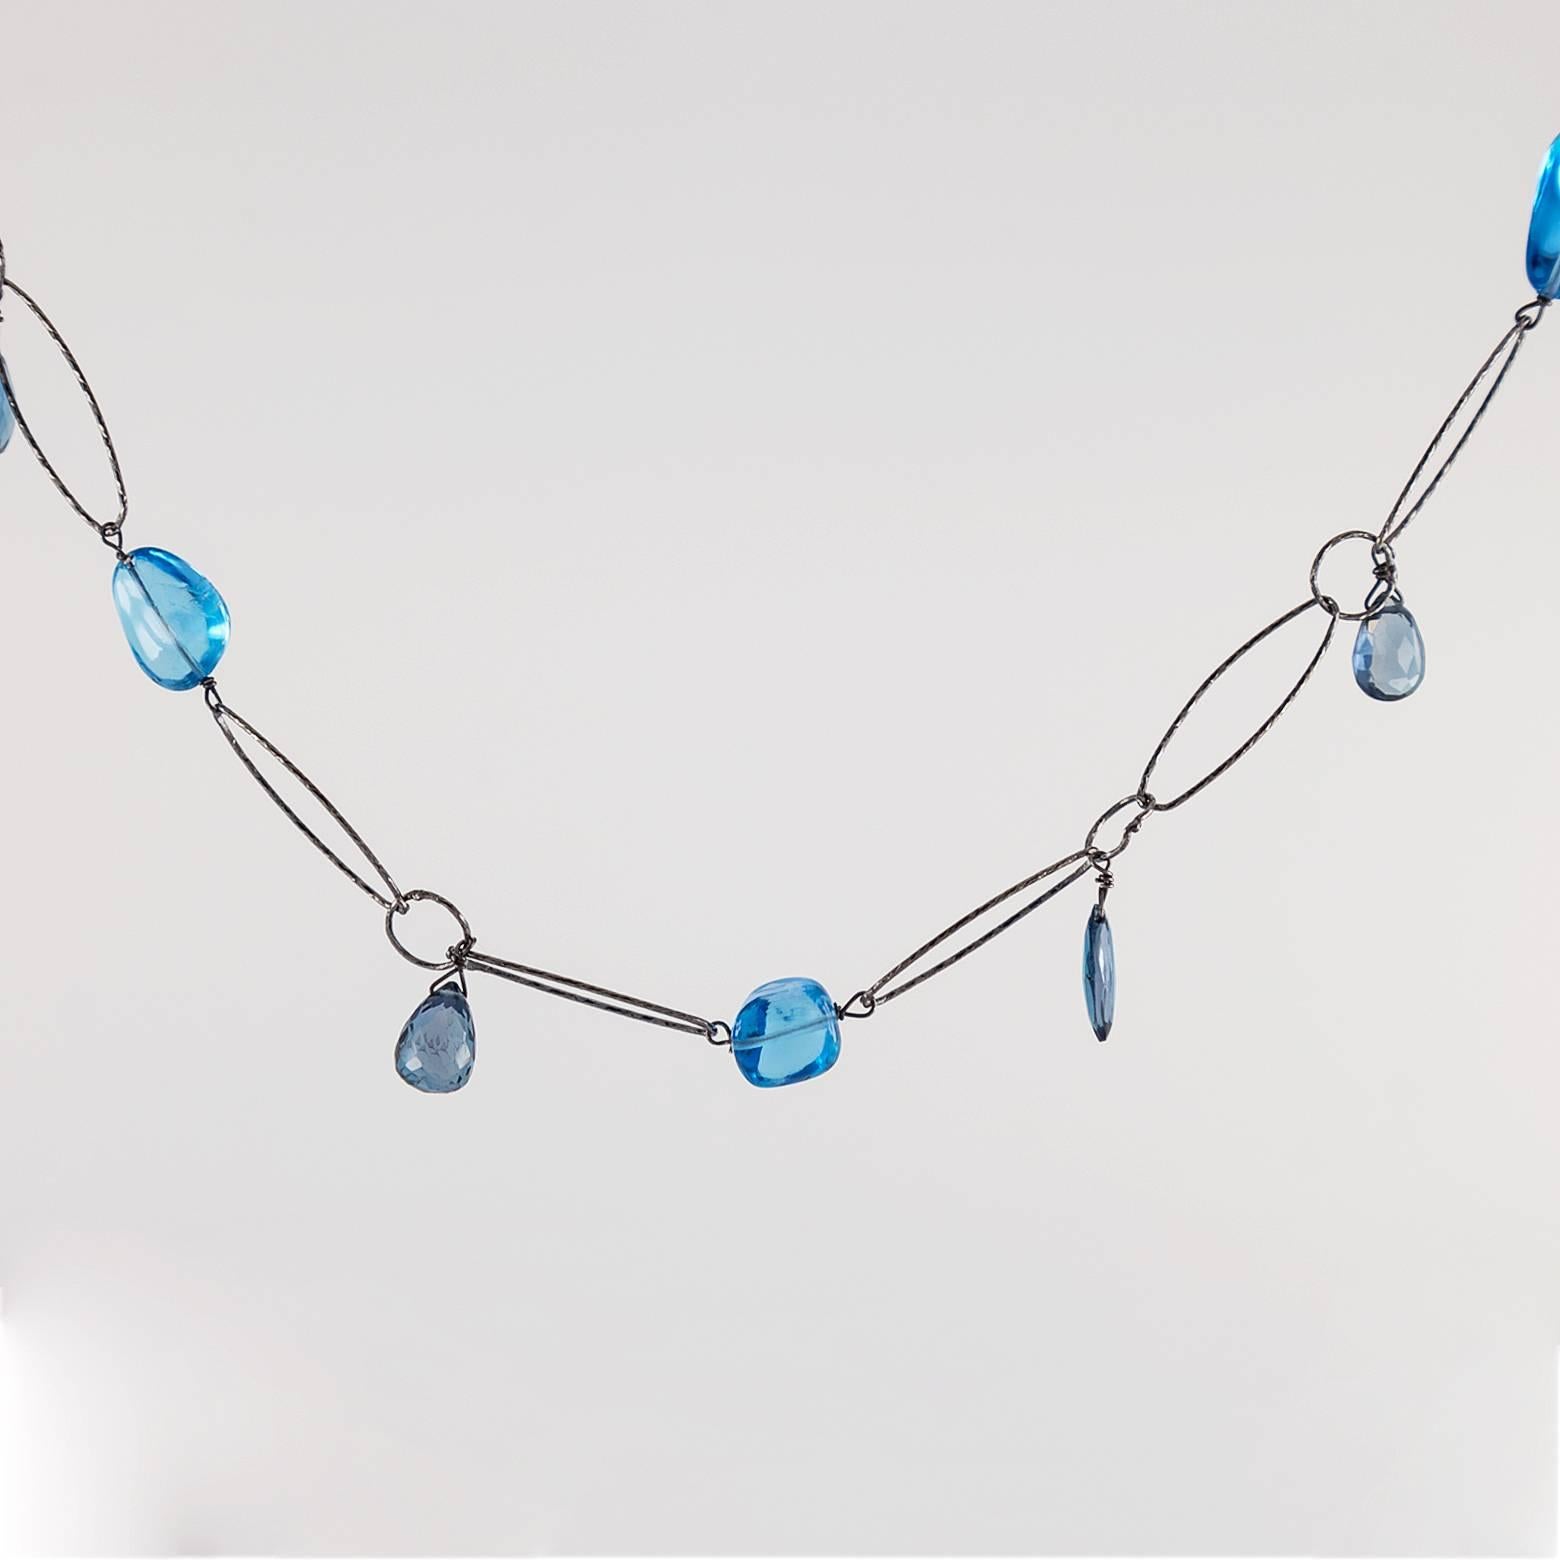 Long and sophisticated tanzanite and kyanite blues and purples ranging in size and hue on an oxidized hammered chain link. With deep ocean blues crossing the distance to light refracting in the atmospheric clouds, this elemental necklace reaches